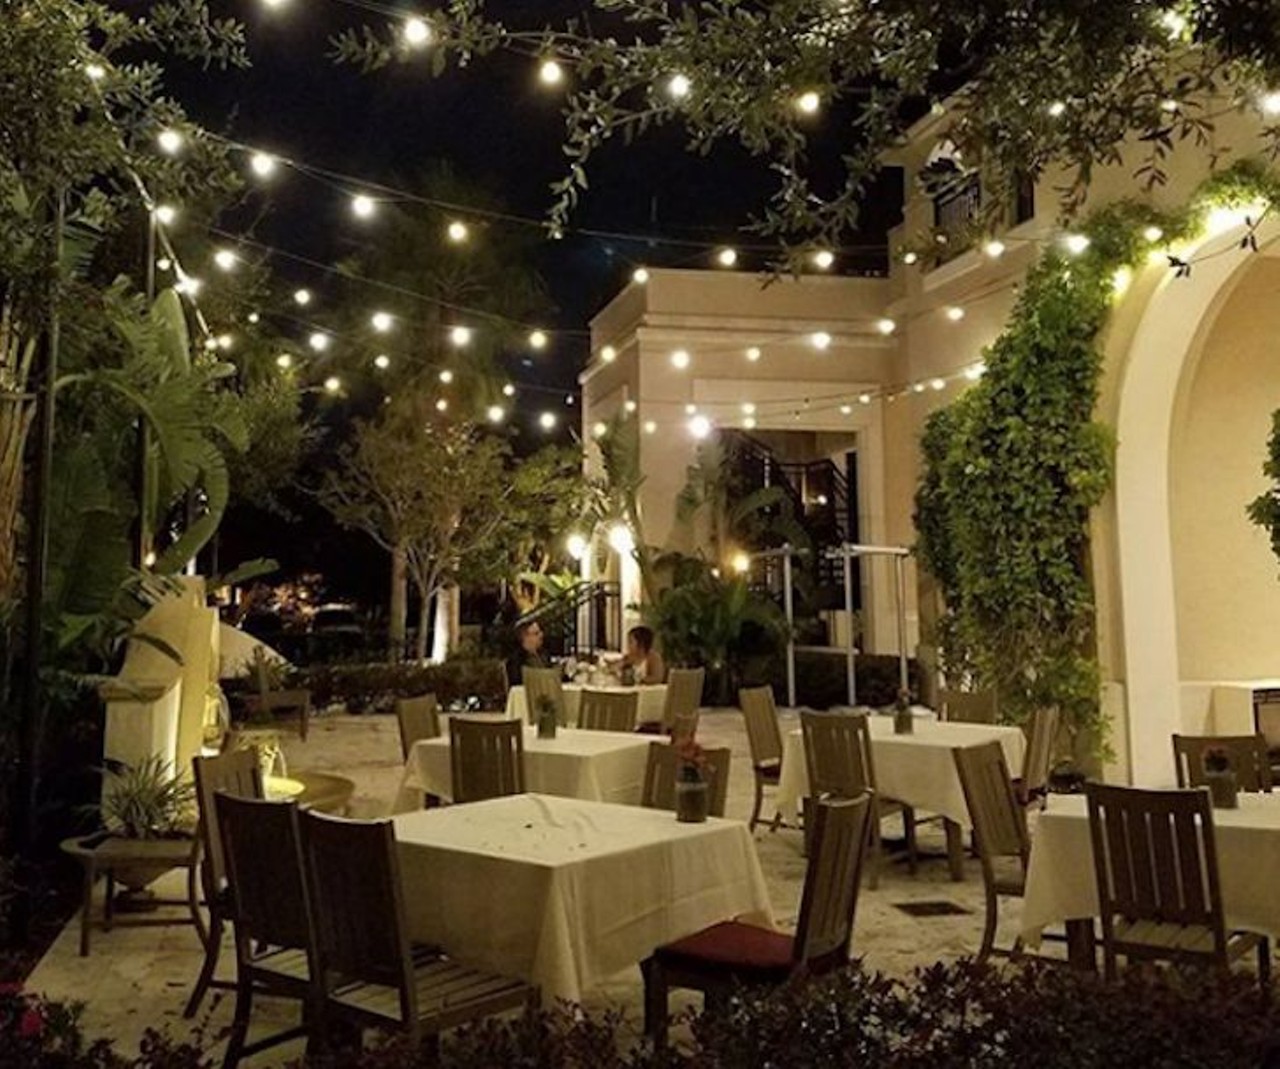 Take advantage of patio season at Orlando&#146;s bars and restaurants
Normally, dining outdoors in Florida is...inelegant, to say the least. Take advantage this time of the year to bask in lakeside, waterfront views or indulge in chic Park Avenue brunches.
Photo via iluvwinterpark/Instagram